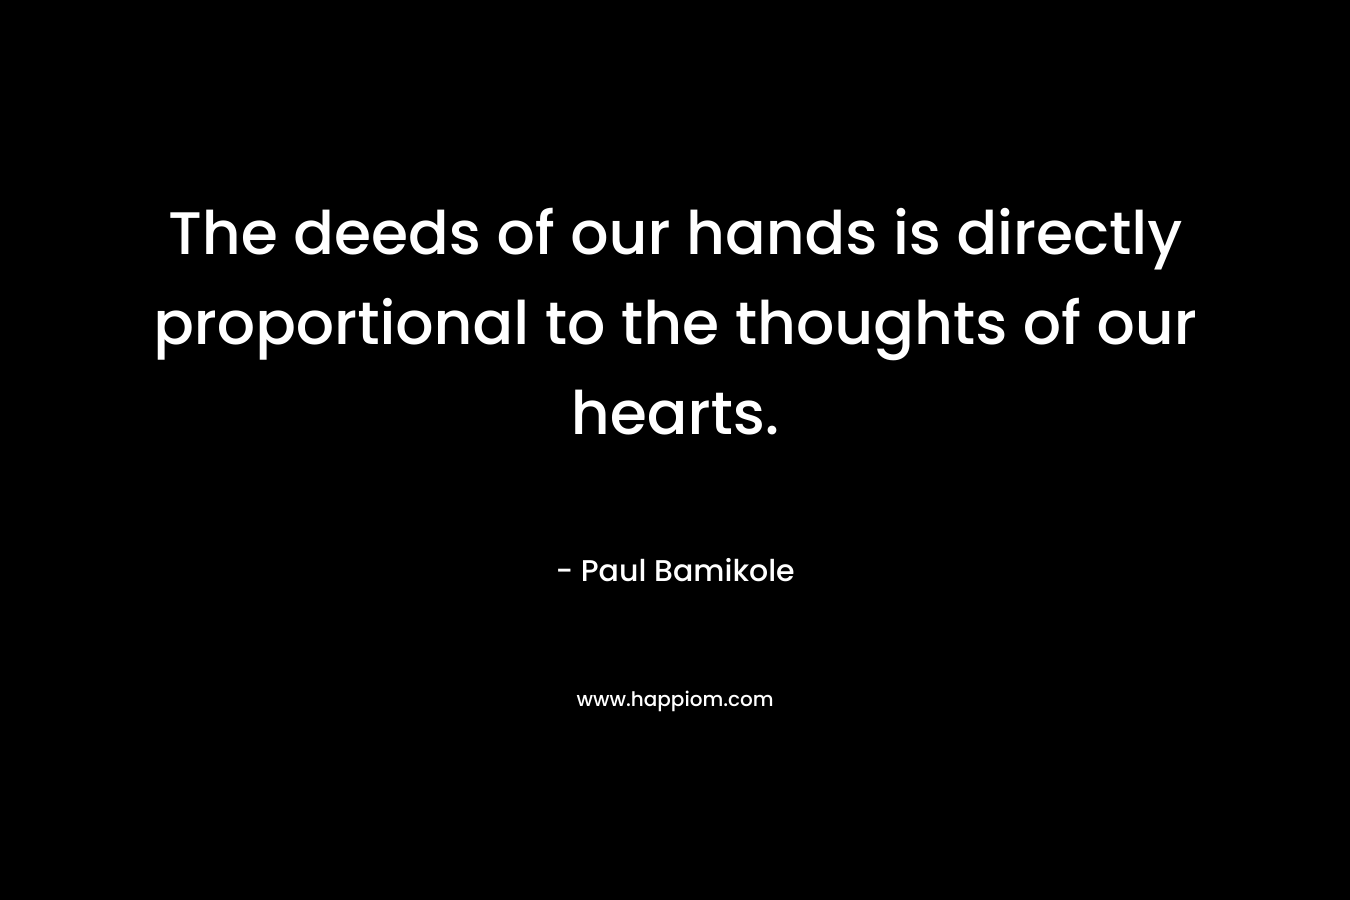 The deeds of our hands is directly proportional to the thoughts of our hearts. – Paul Bamikole